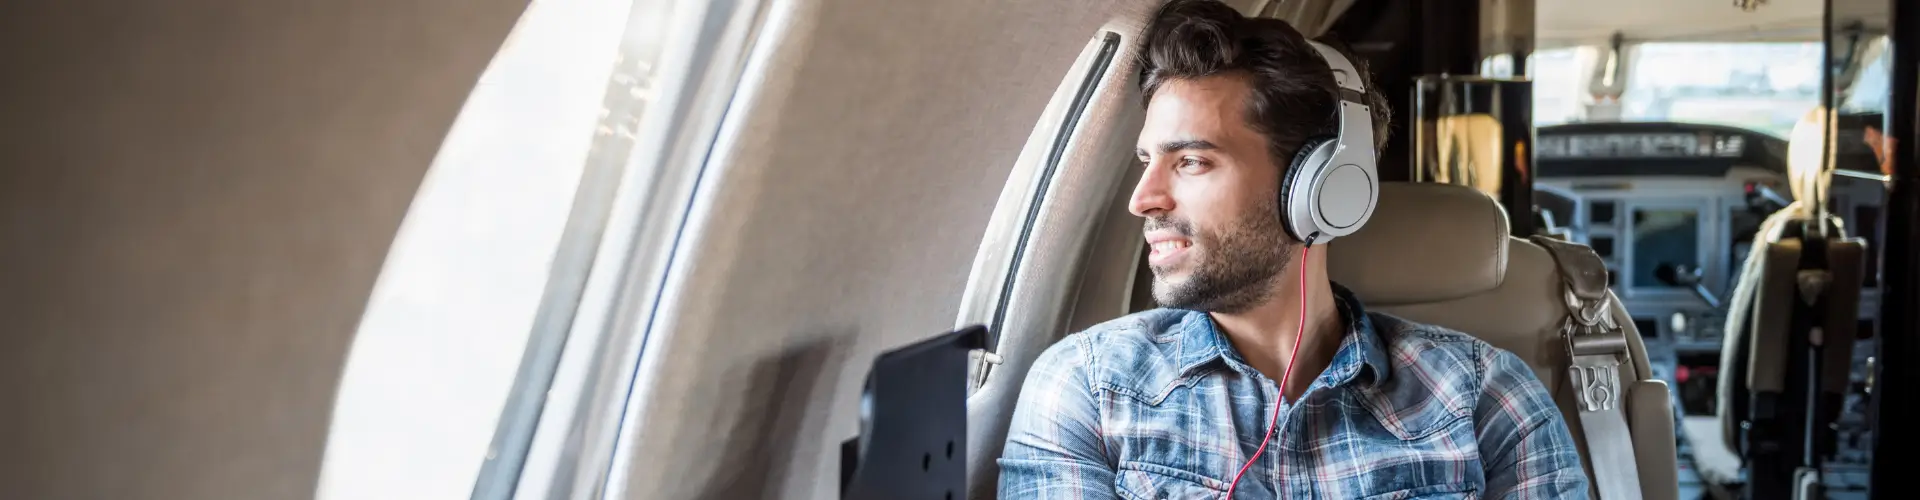 7 Must-Haves to Take with You on the Plane